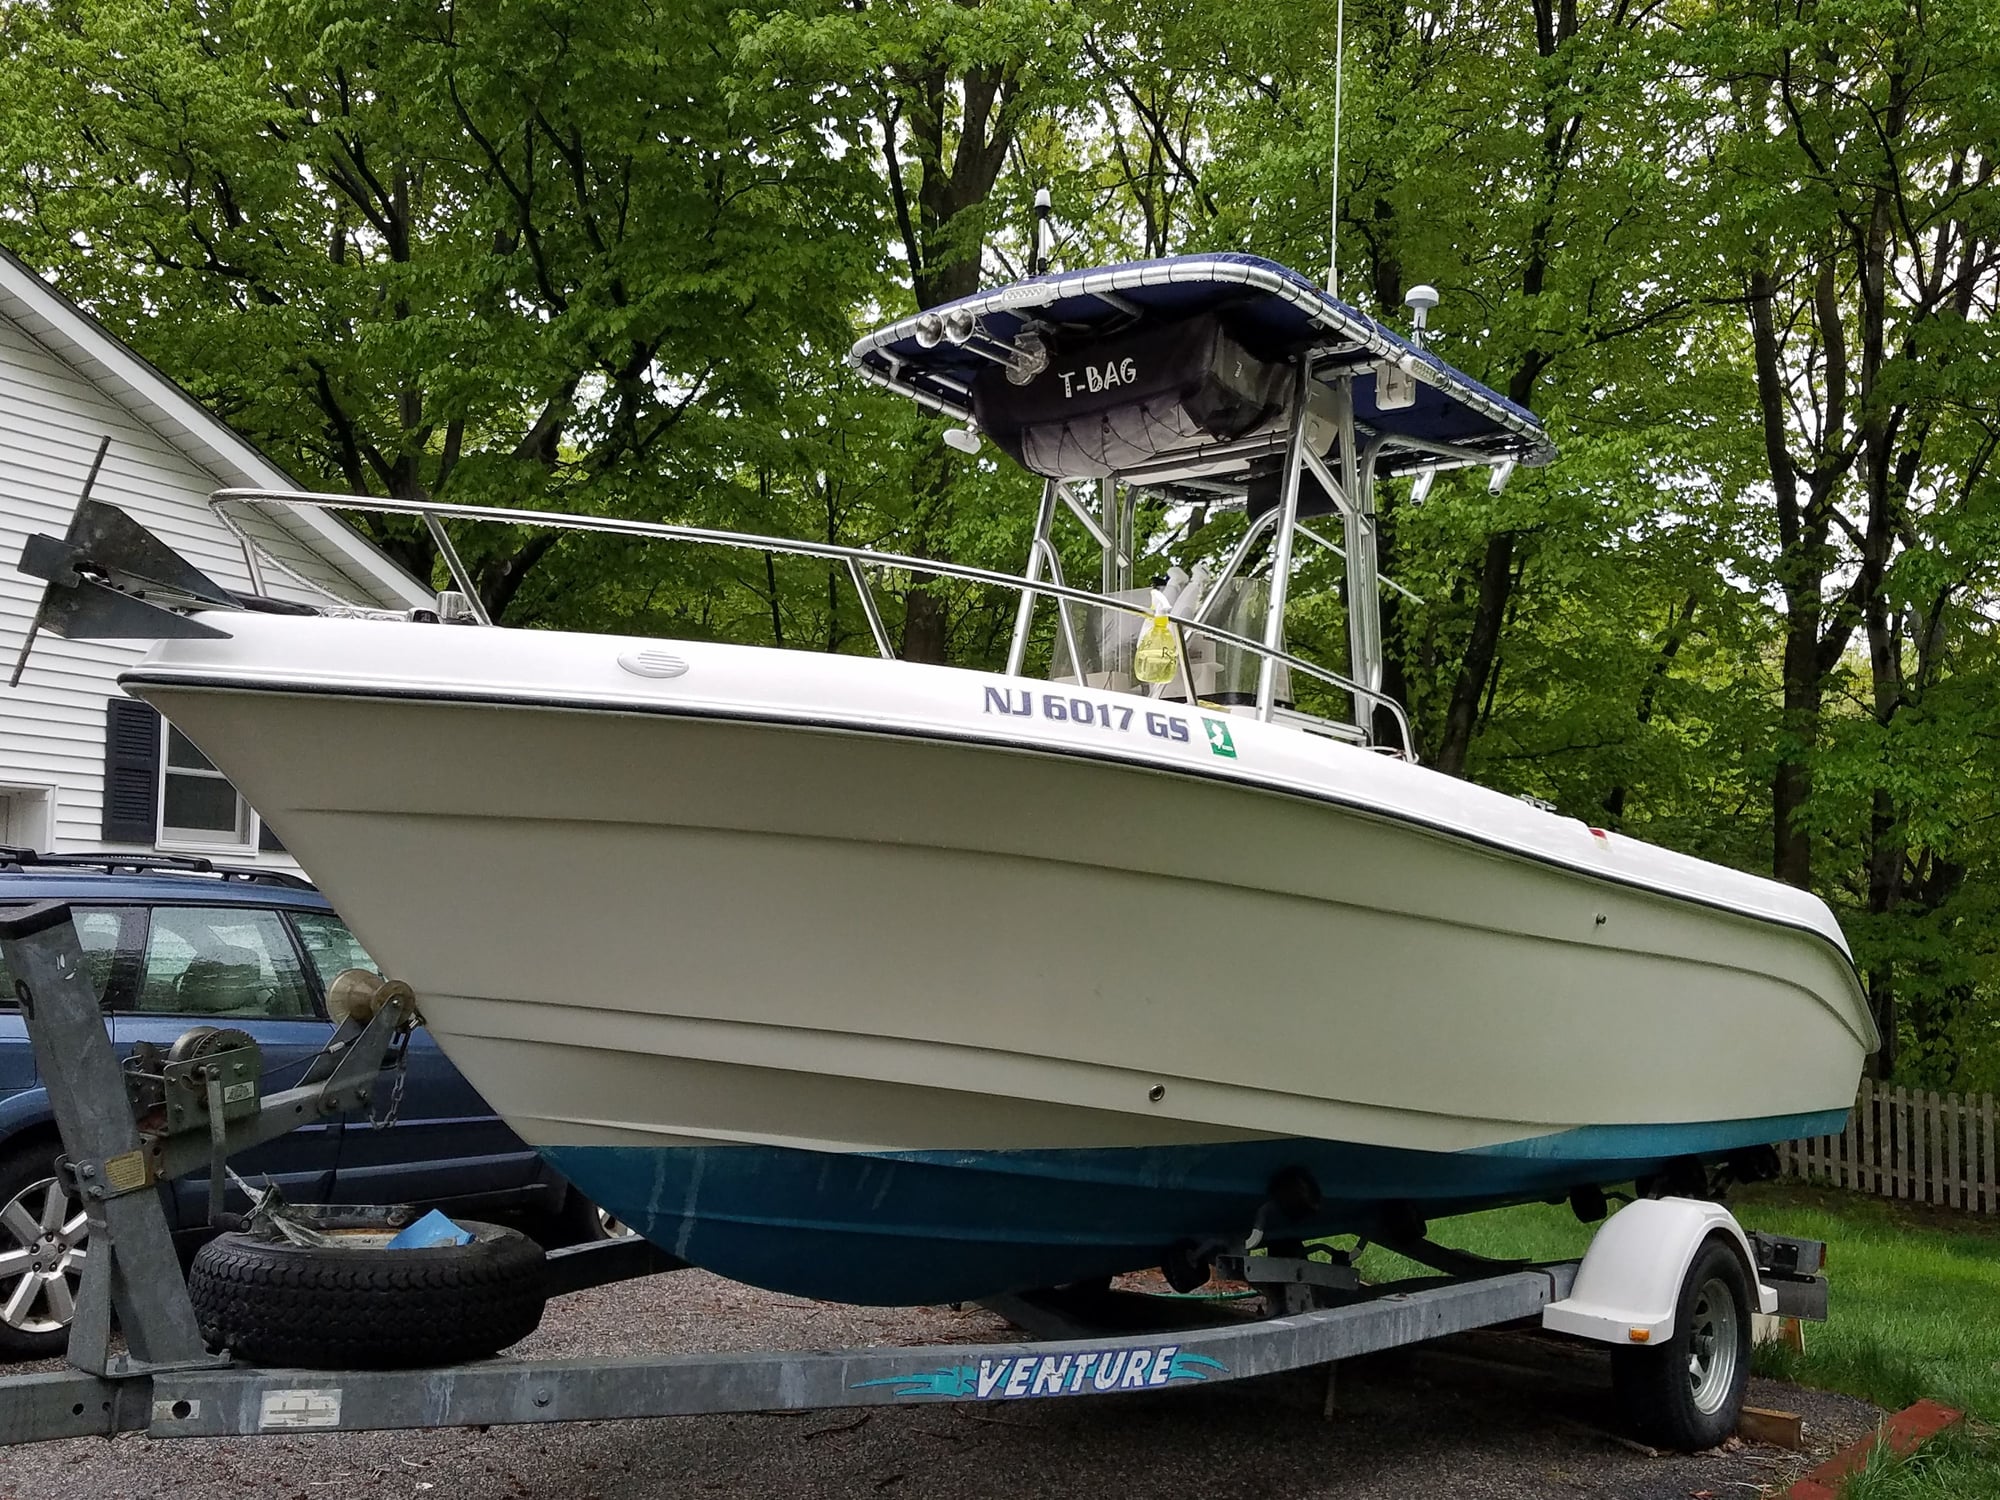 My 1st Boat! Could use some advice